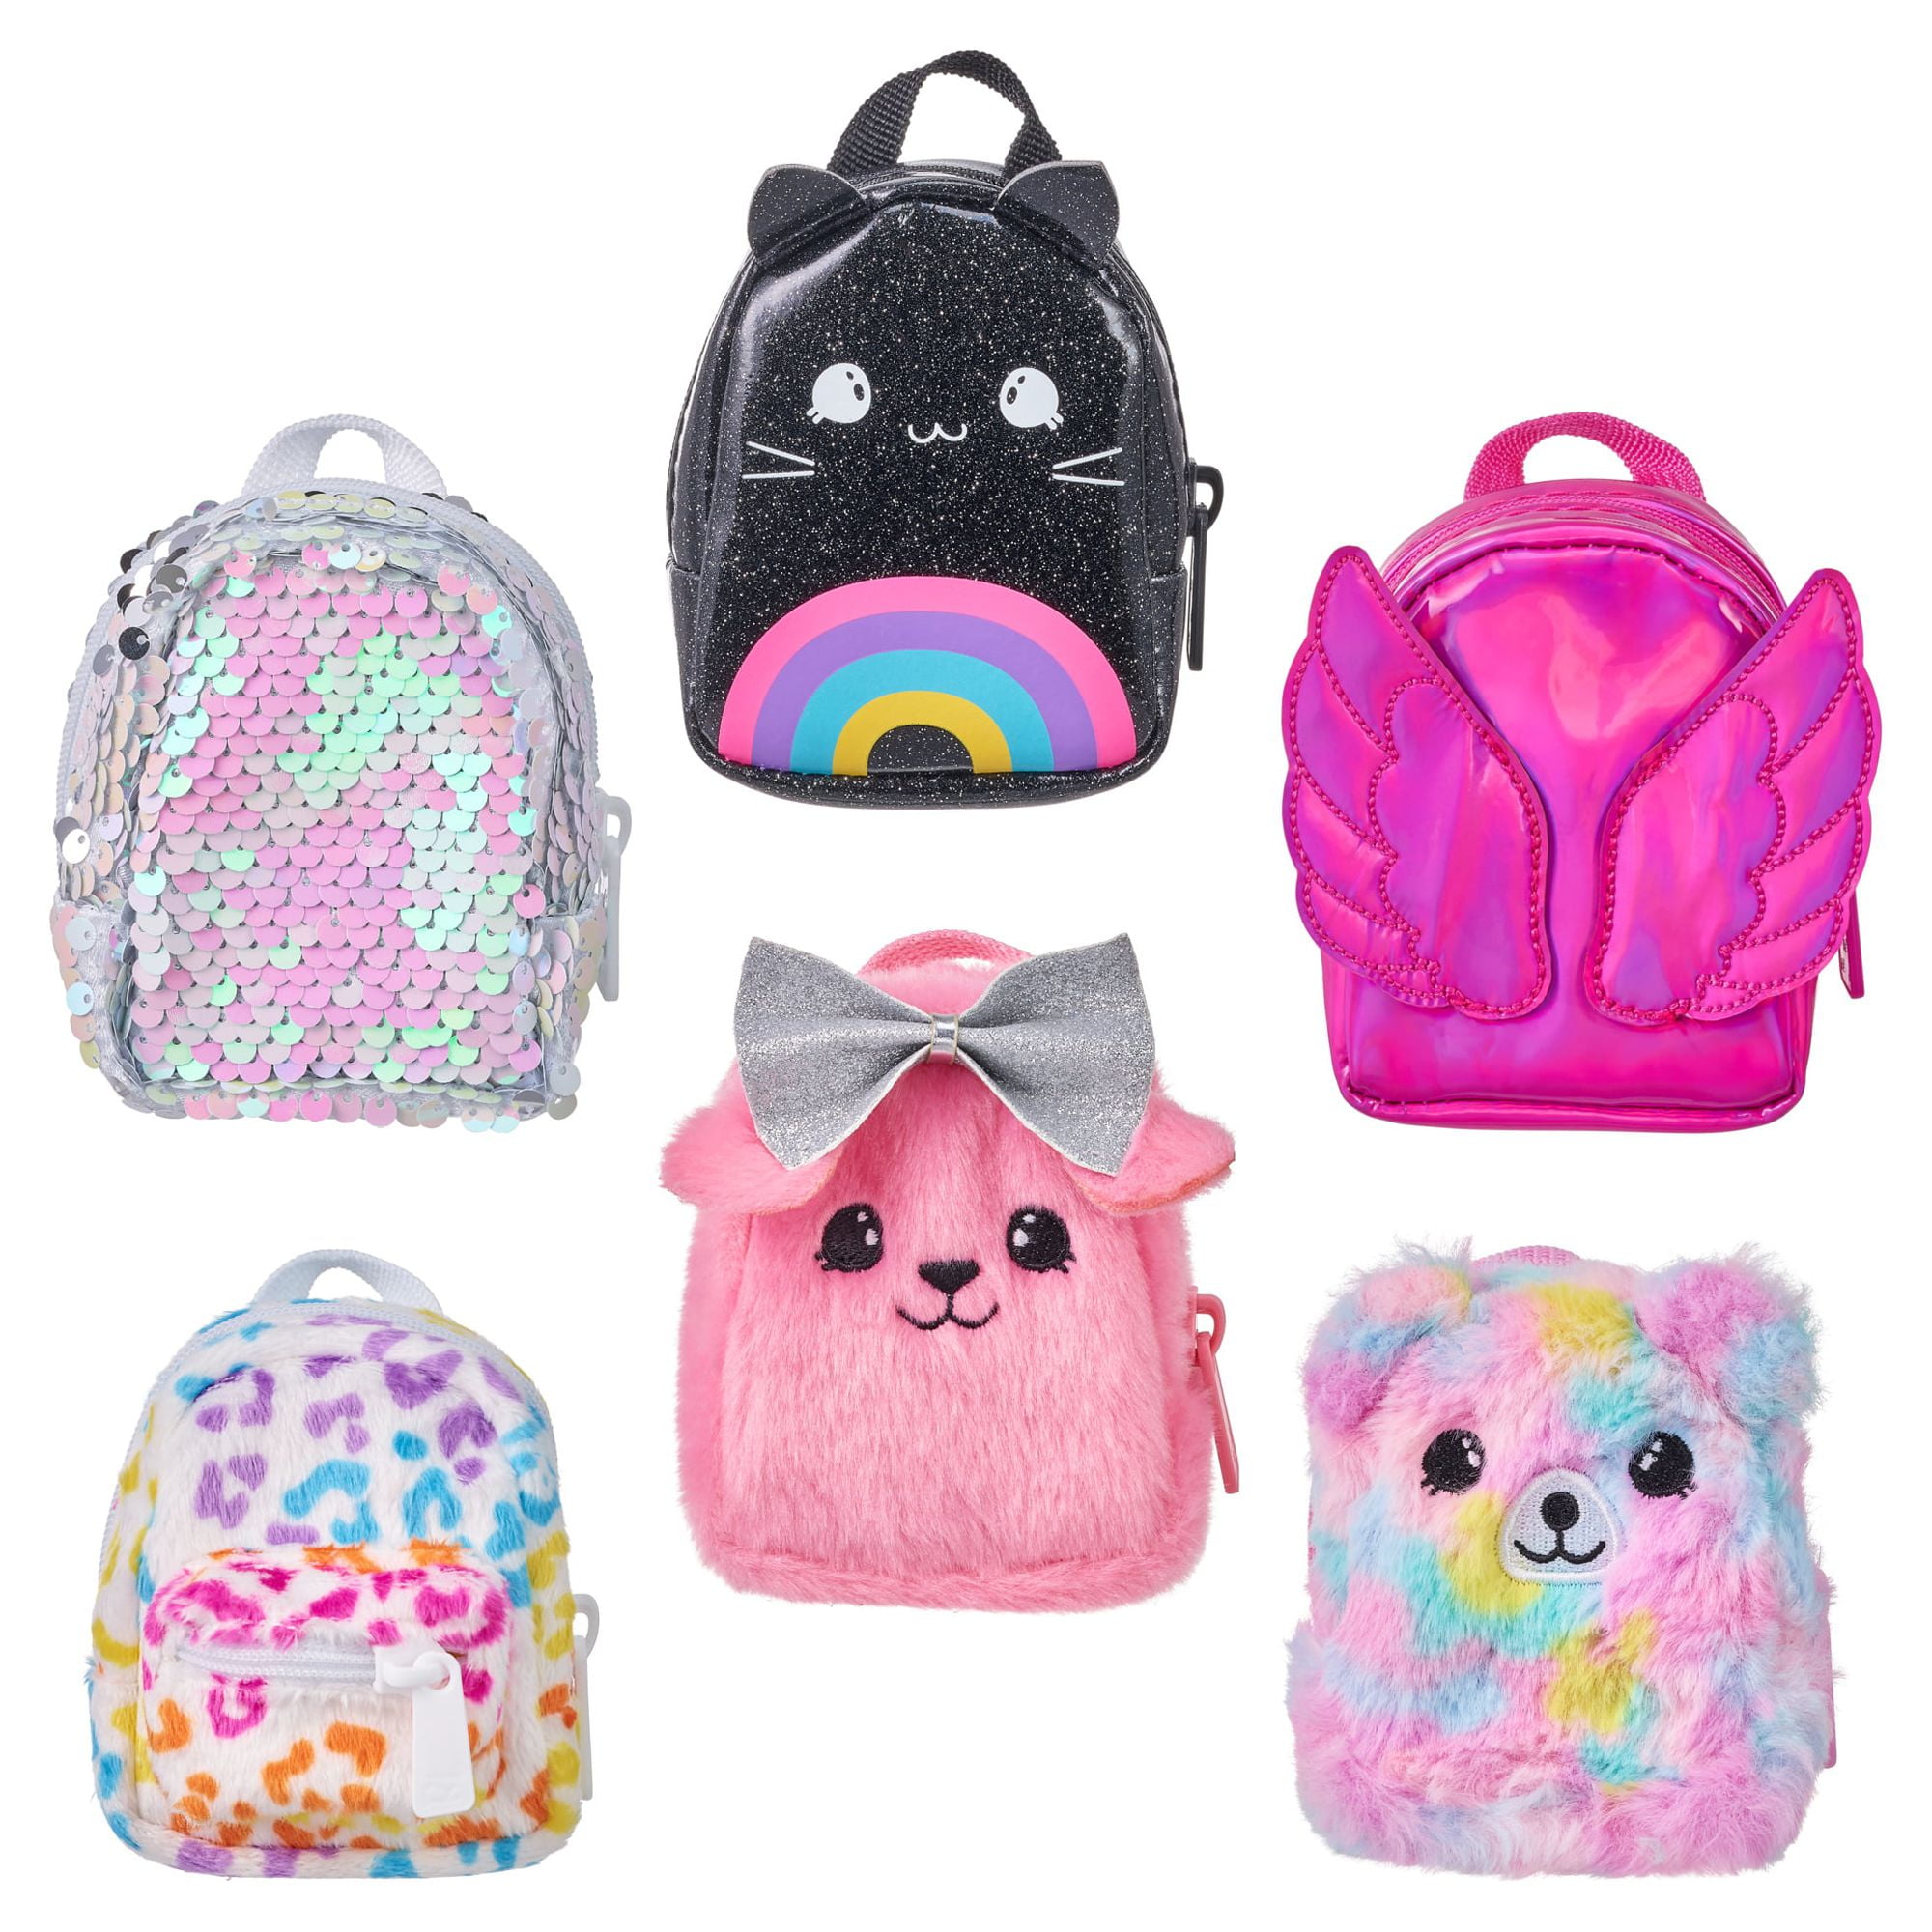  REAL LITTLES - Collectible Micro Backpack and Micro Handbag  with 12 Micro Working Surprises Inside!, Multicolor (25324) : Toys & Games